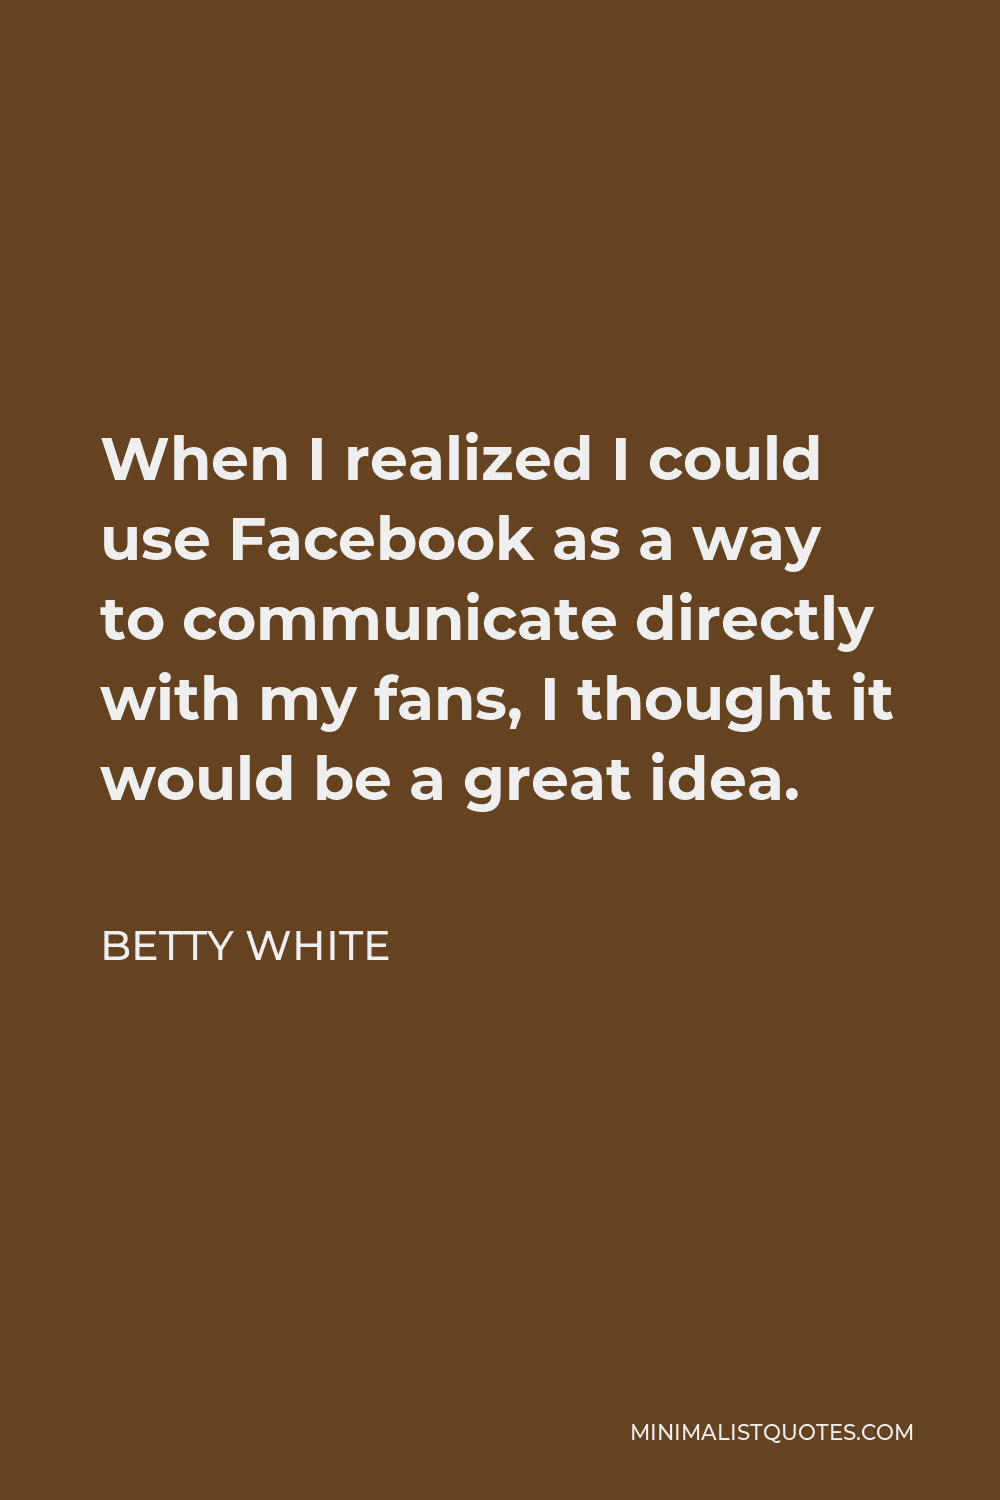 Betty White Quote - When I realized I could use Facebook as a way to communicate directly with my fans, I thought it would be a great idea.